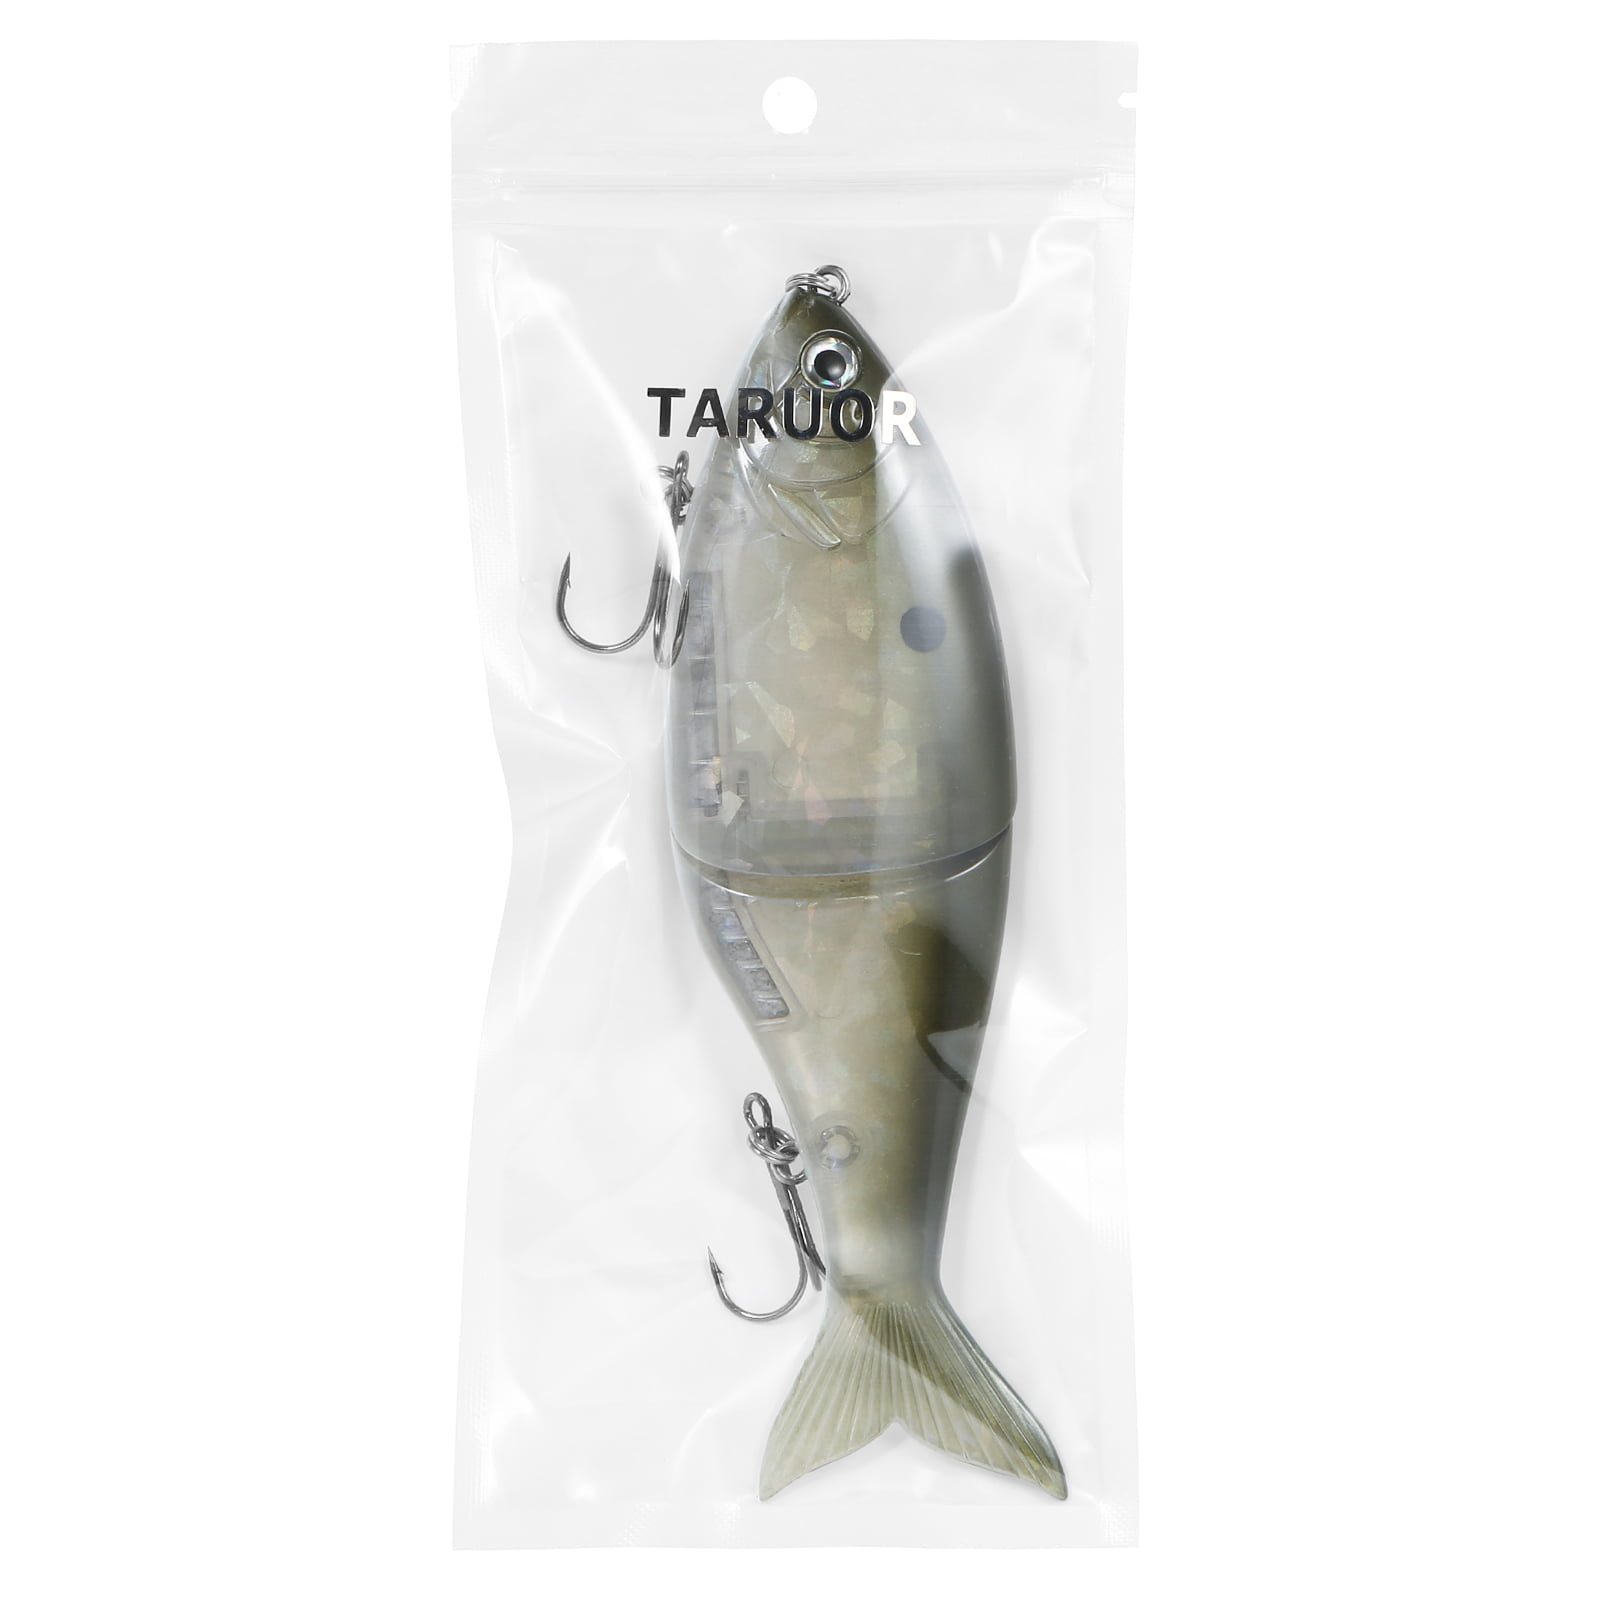 Taruor Glider Fishing Lures 178mm Glide Bait Jointed Swimbait Artificial Hard Baits Lures with Treble Hooks, Size: Color 15